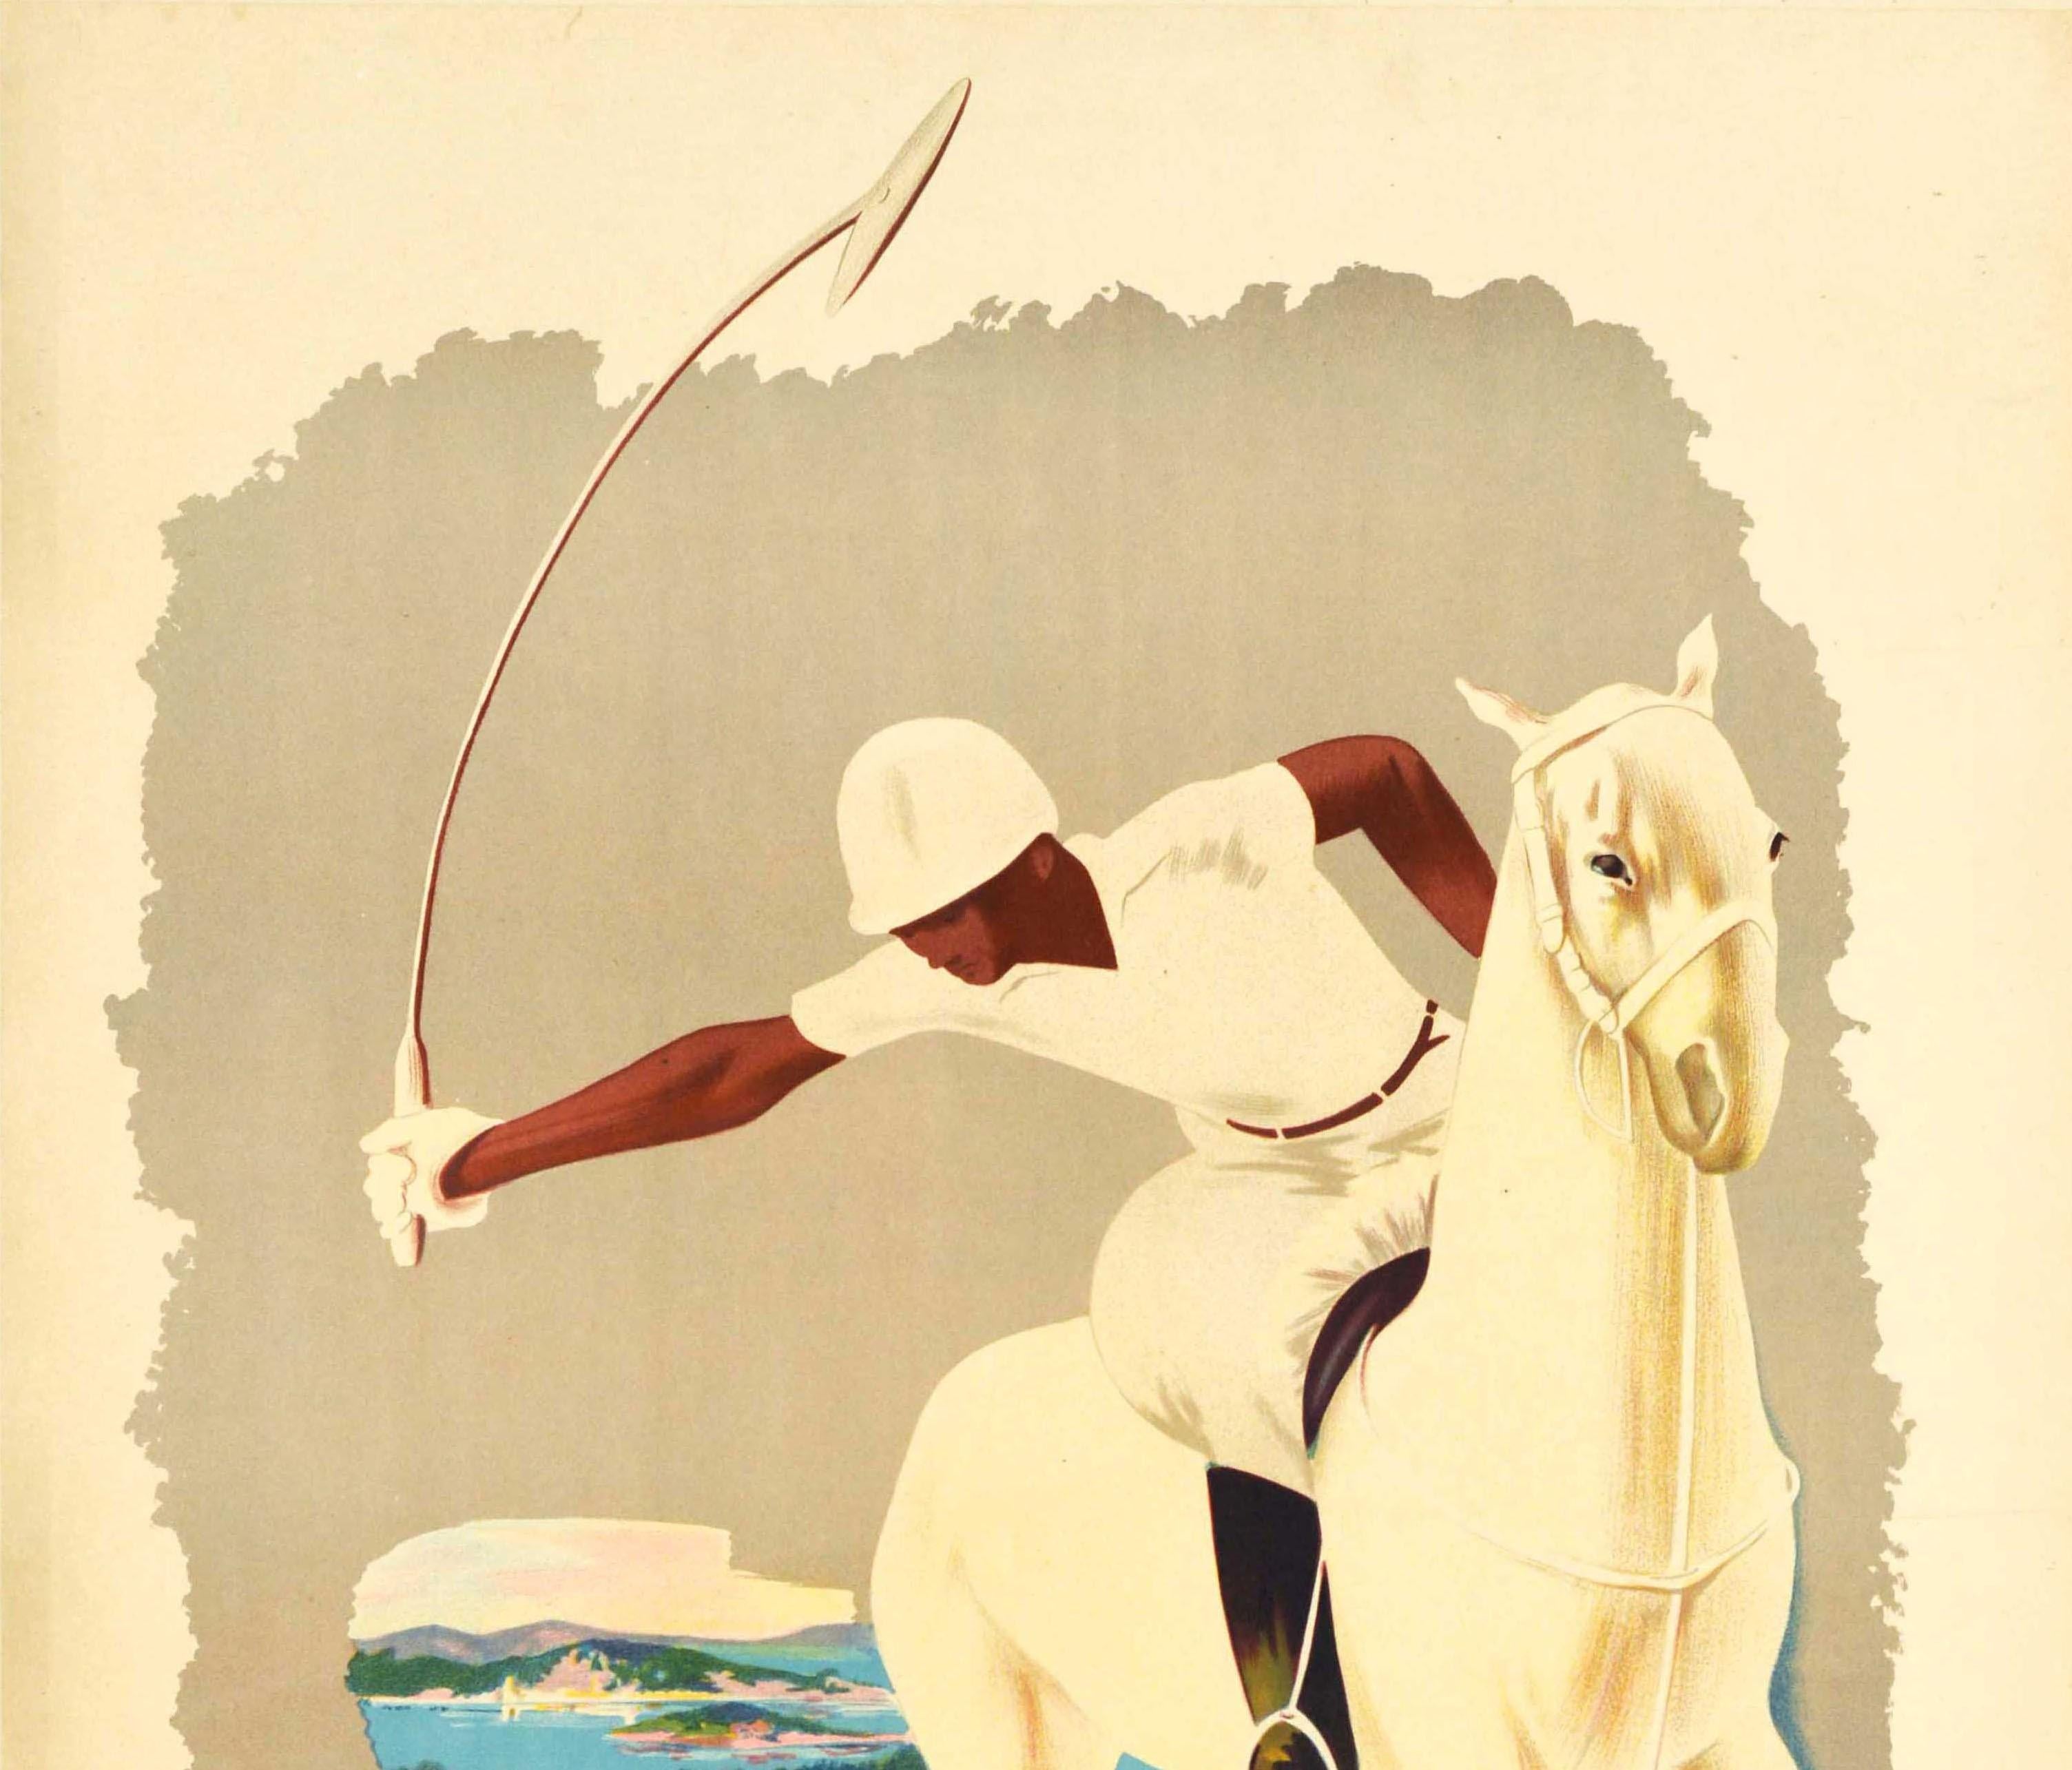 Original Vintage ENIT Travel Poster Brioni Italy Polo Sailing Golf Sport Design - Print by Unknown